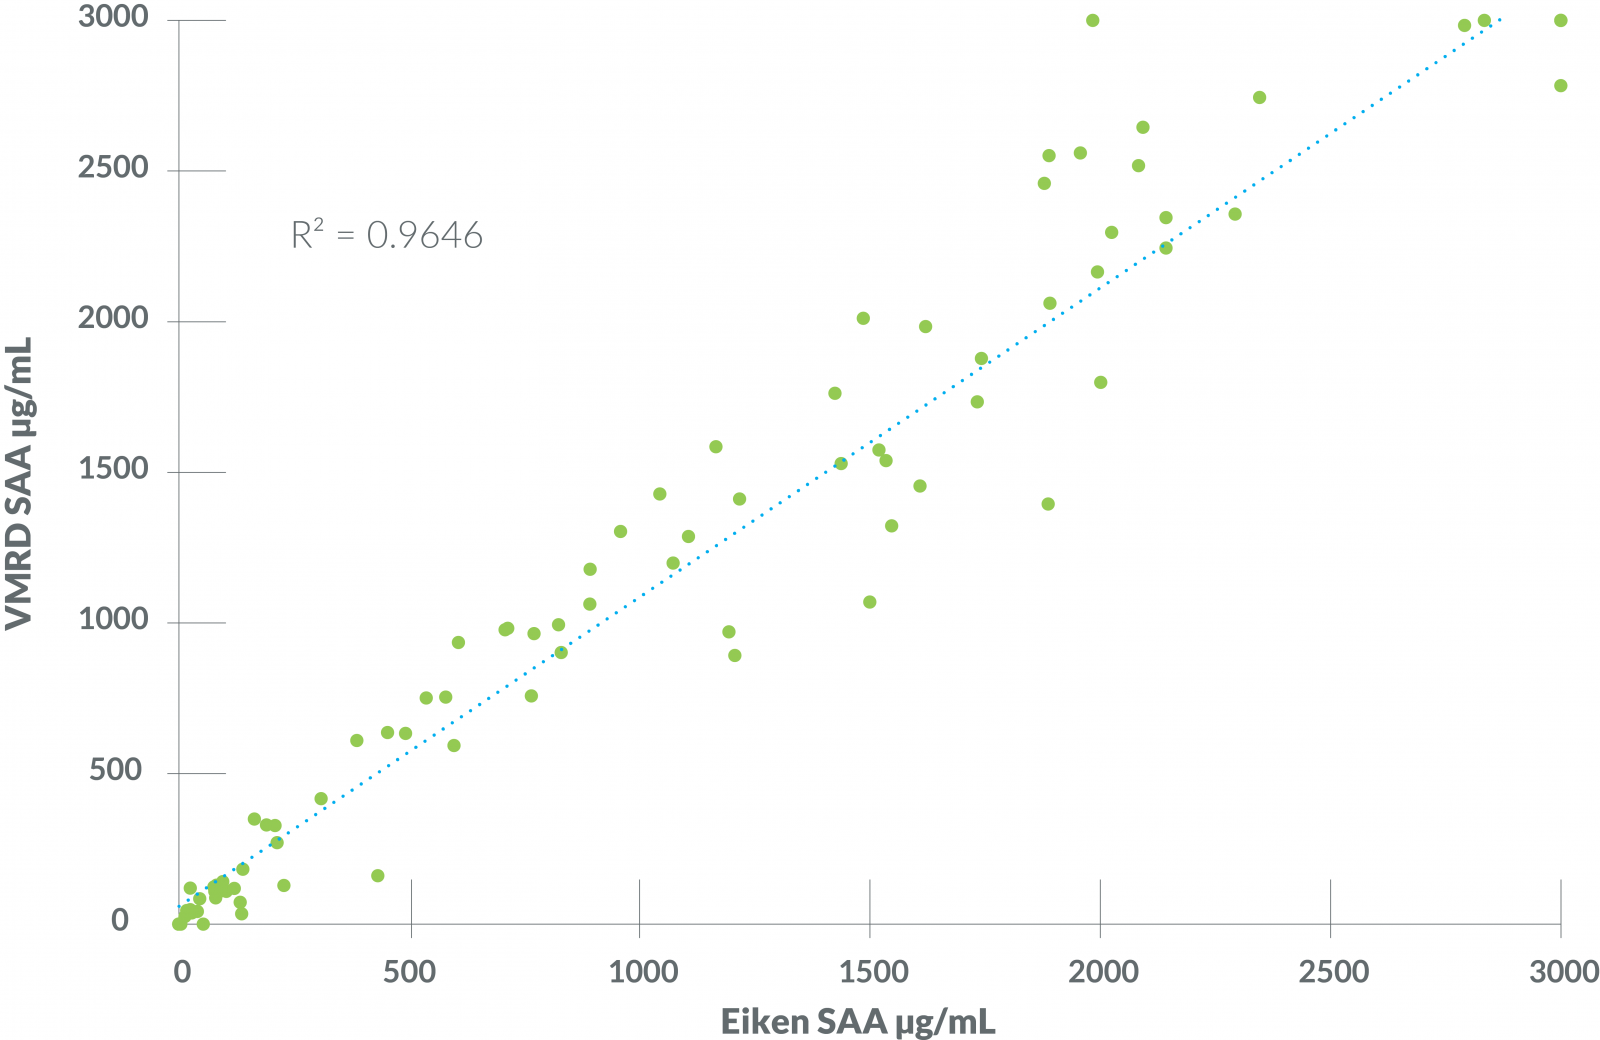 Results from the VMRD SAA test exhibited a strong positive correlation and agreement with the Eiken LZ-SAA assay (performed at the University of Miami Acute Phase Protein Laboratory) used as a reference.